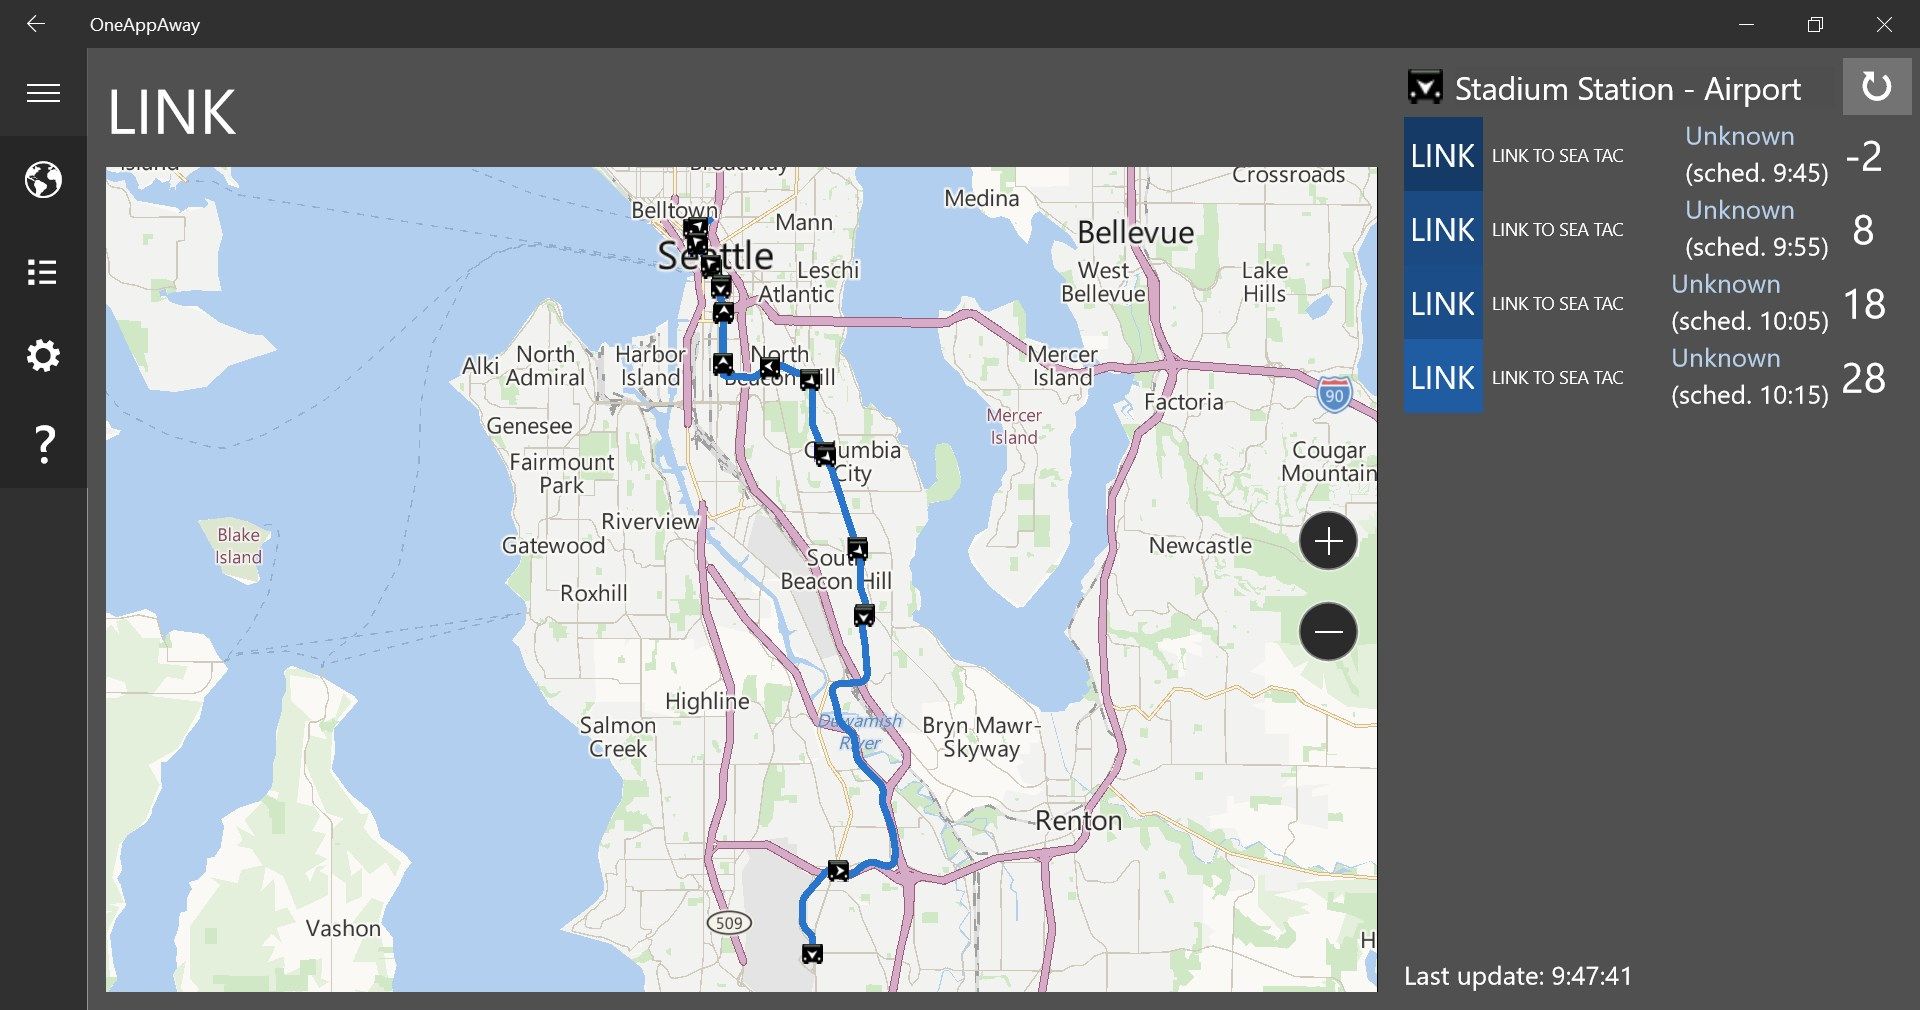 Get details on a specific route, including a map of the route and the stops it serves.